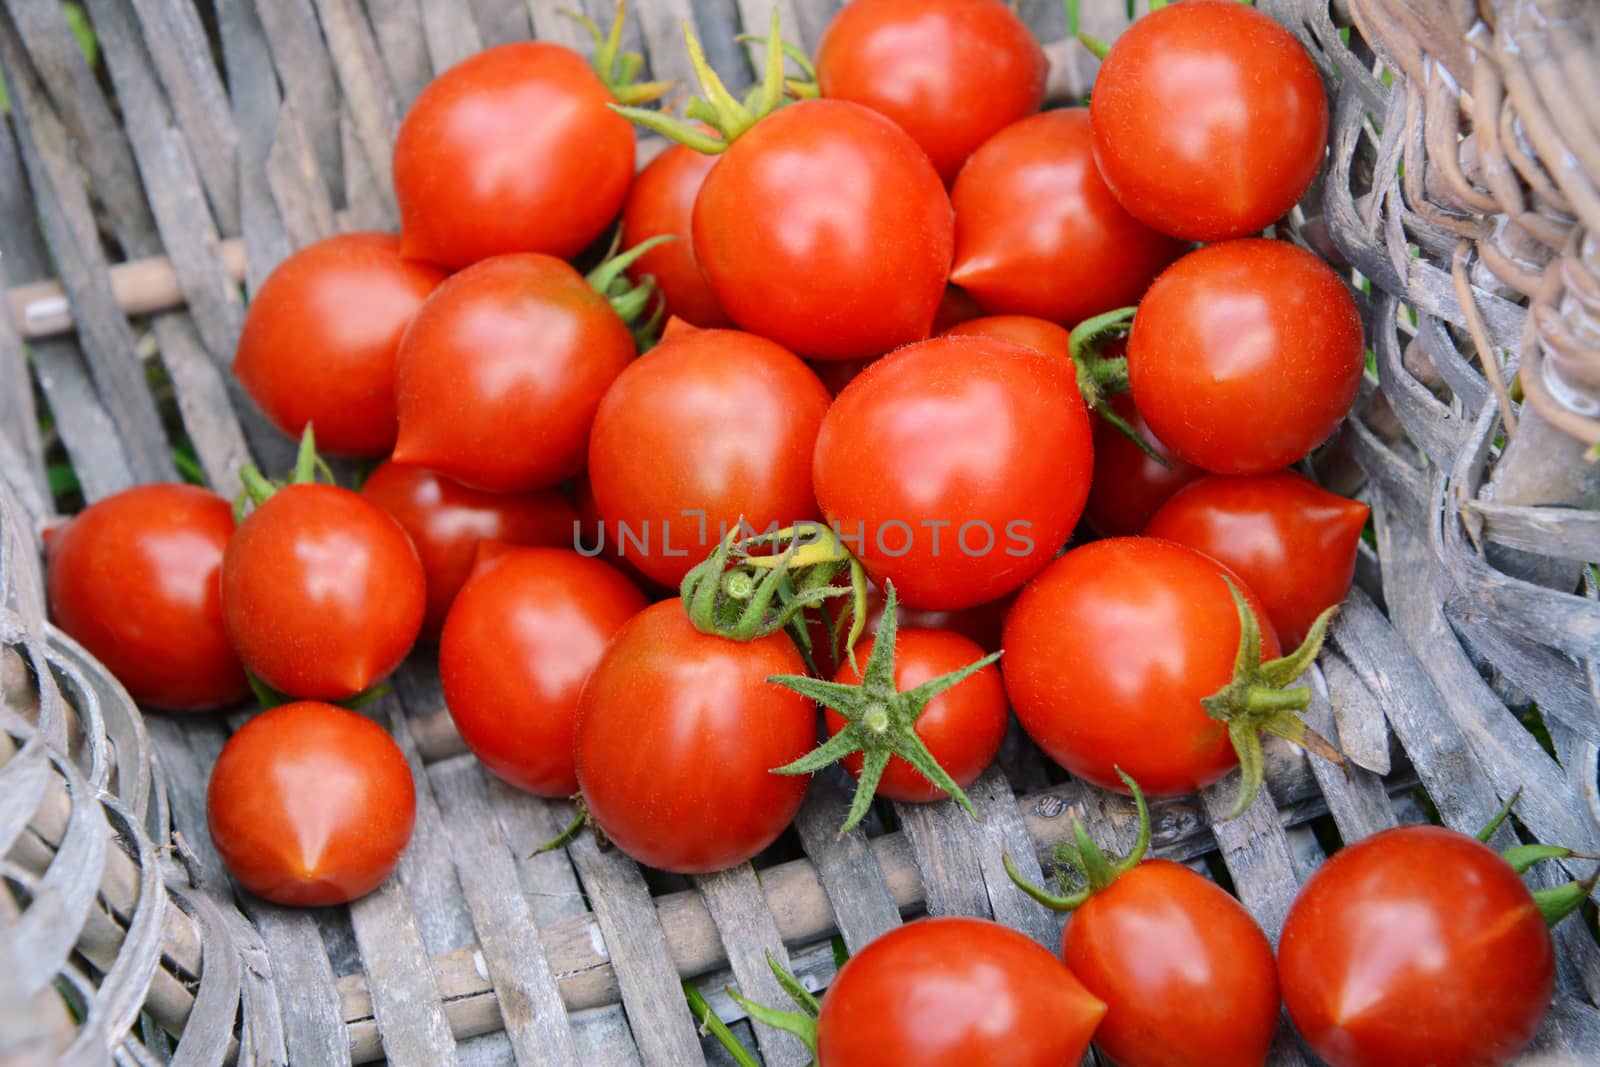 Freshly picked ripe red tomatoes from an allotment, piled in the corner of a woven basket